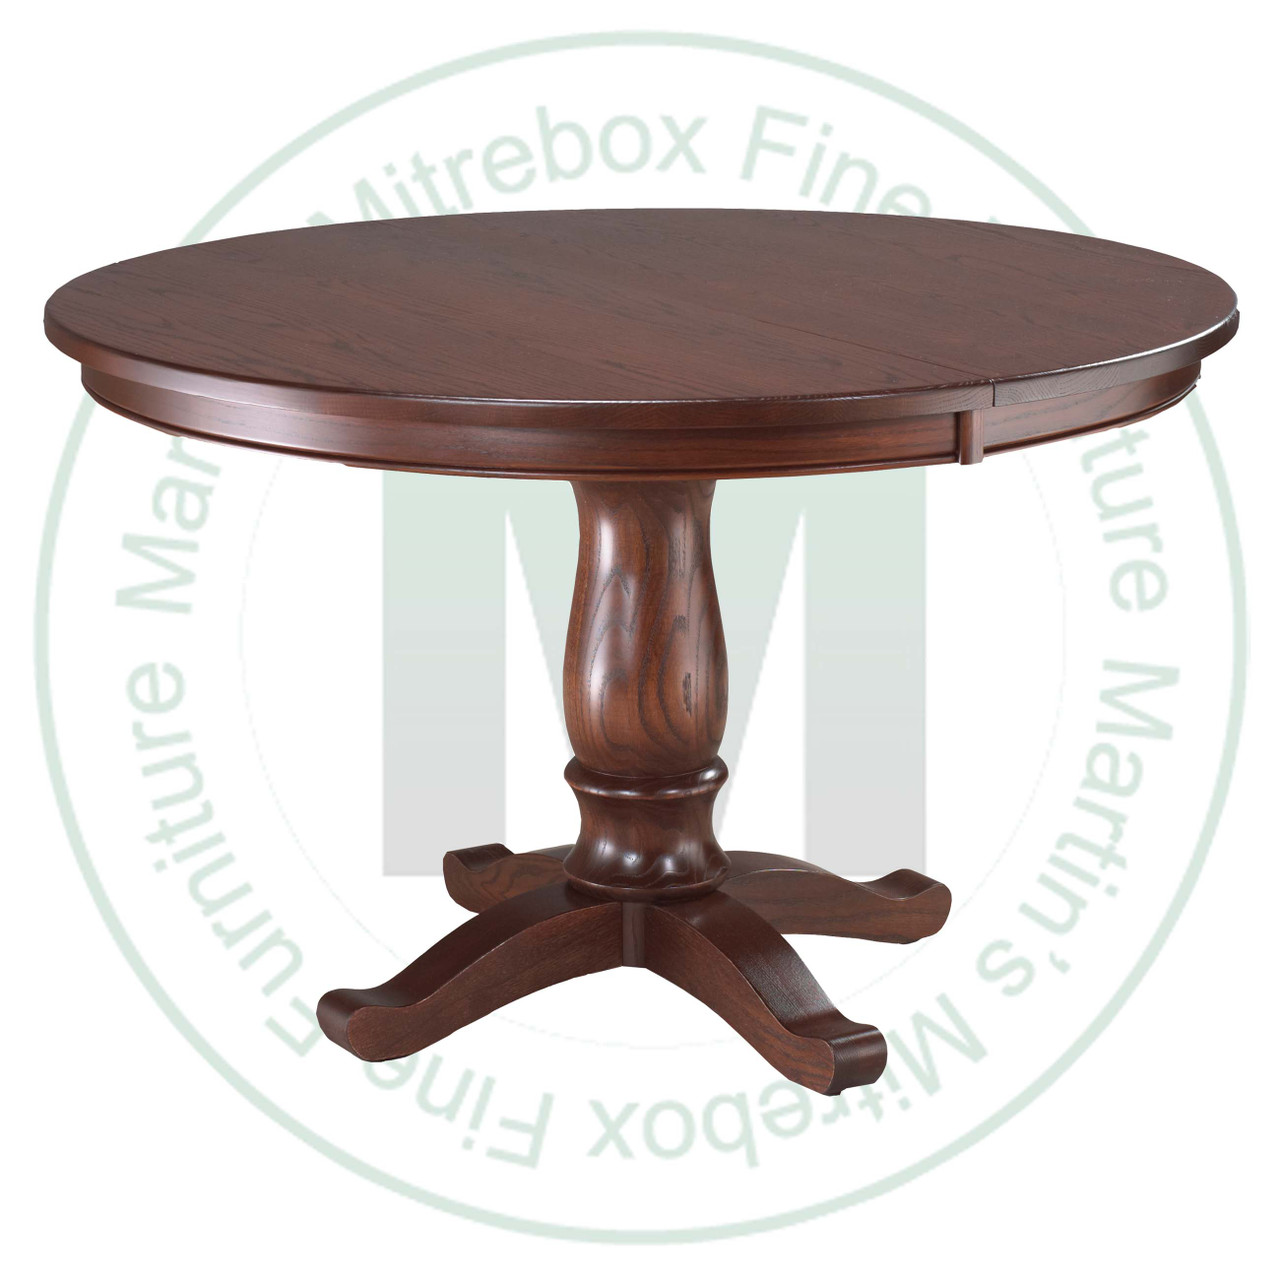 Wormy Maple Kimberly Crest Single Pedestal Table 60''D x 60''W x 30''H Round Solid Table. Table Has 1'' Thick Top.